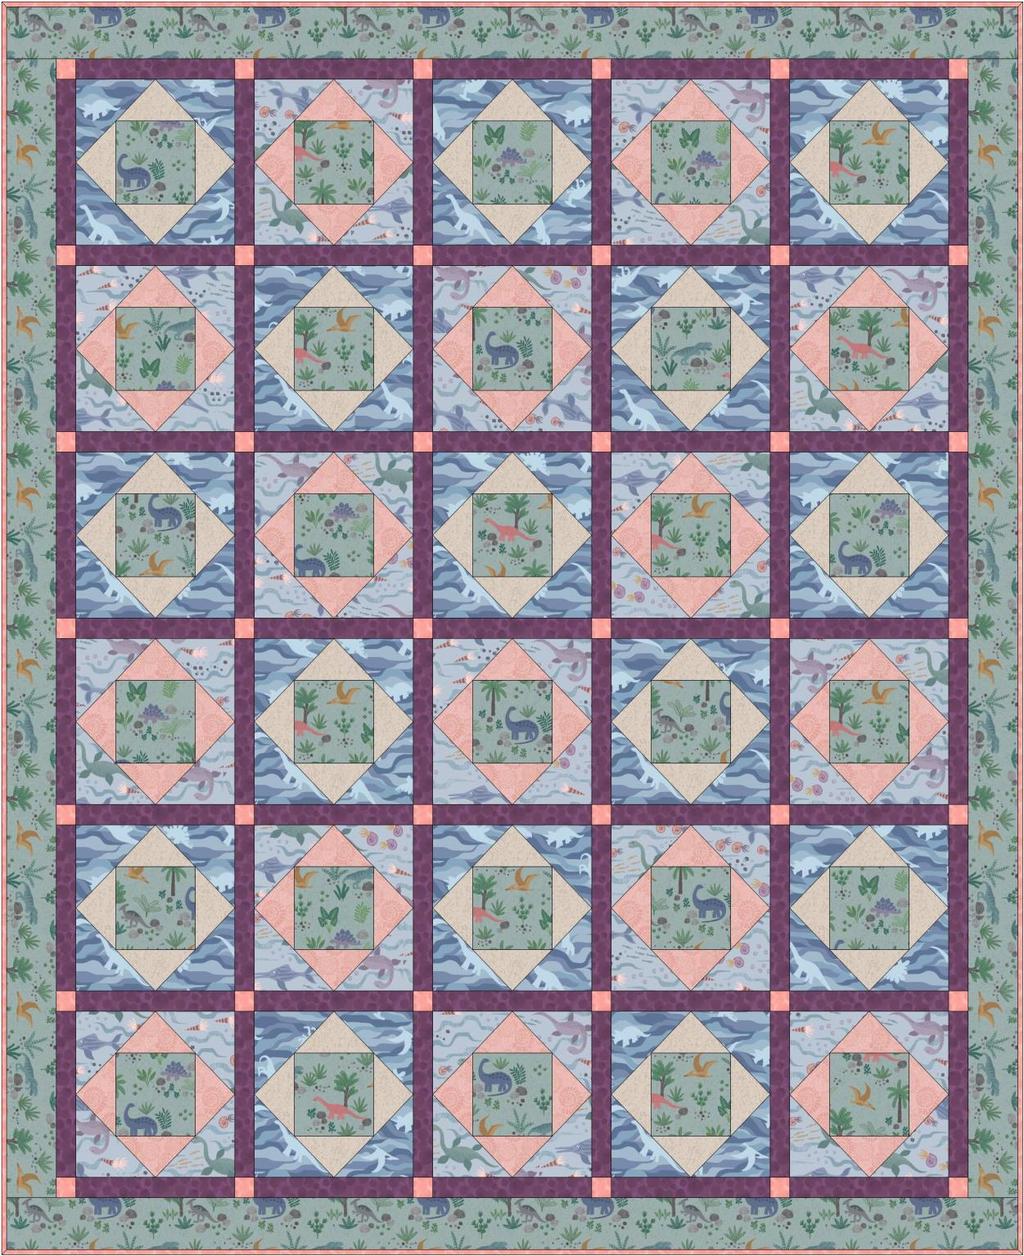 Kimmeridge Bay Quilt Designed and made by Sally Ablett Quilt Size: 51 x 60 Block Size: 8½ x 8½ DESIGN 1 (Main Diagram) FABRIC REQUIREMENTS (Kimmeridge Bay